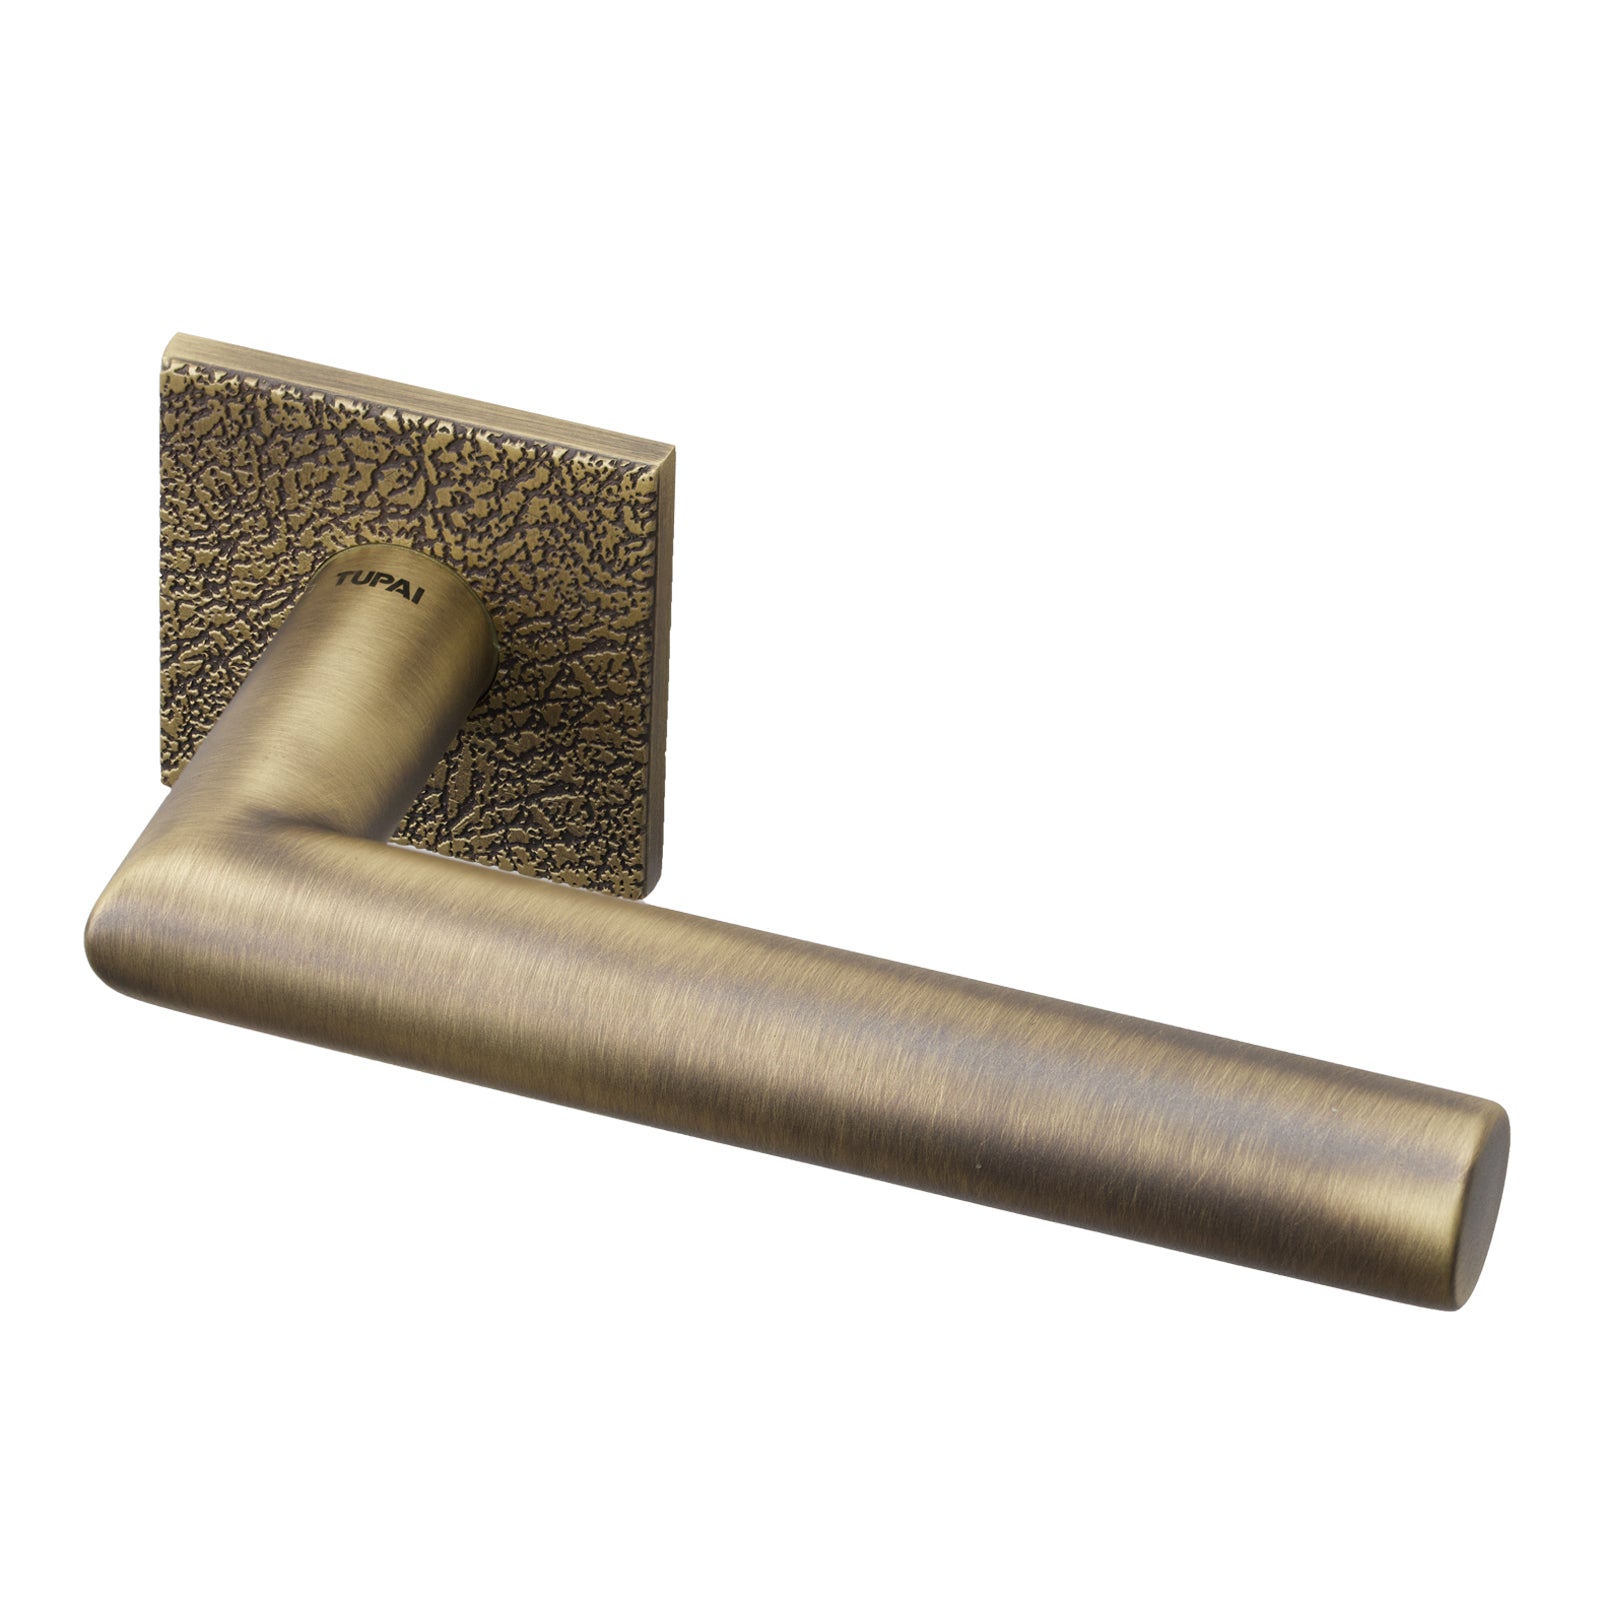 Larouco Leather Texture Lever on Rose Door Handle in Antique Brass Finish SHOW